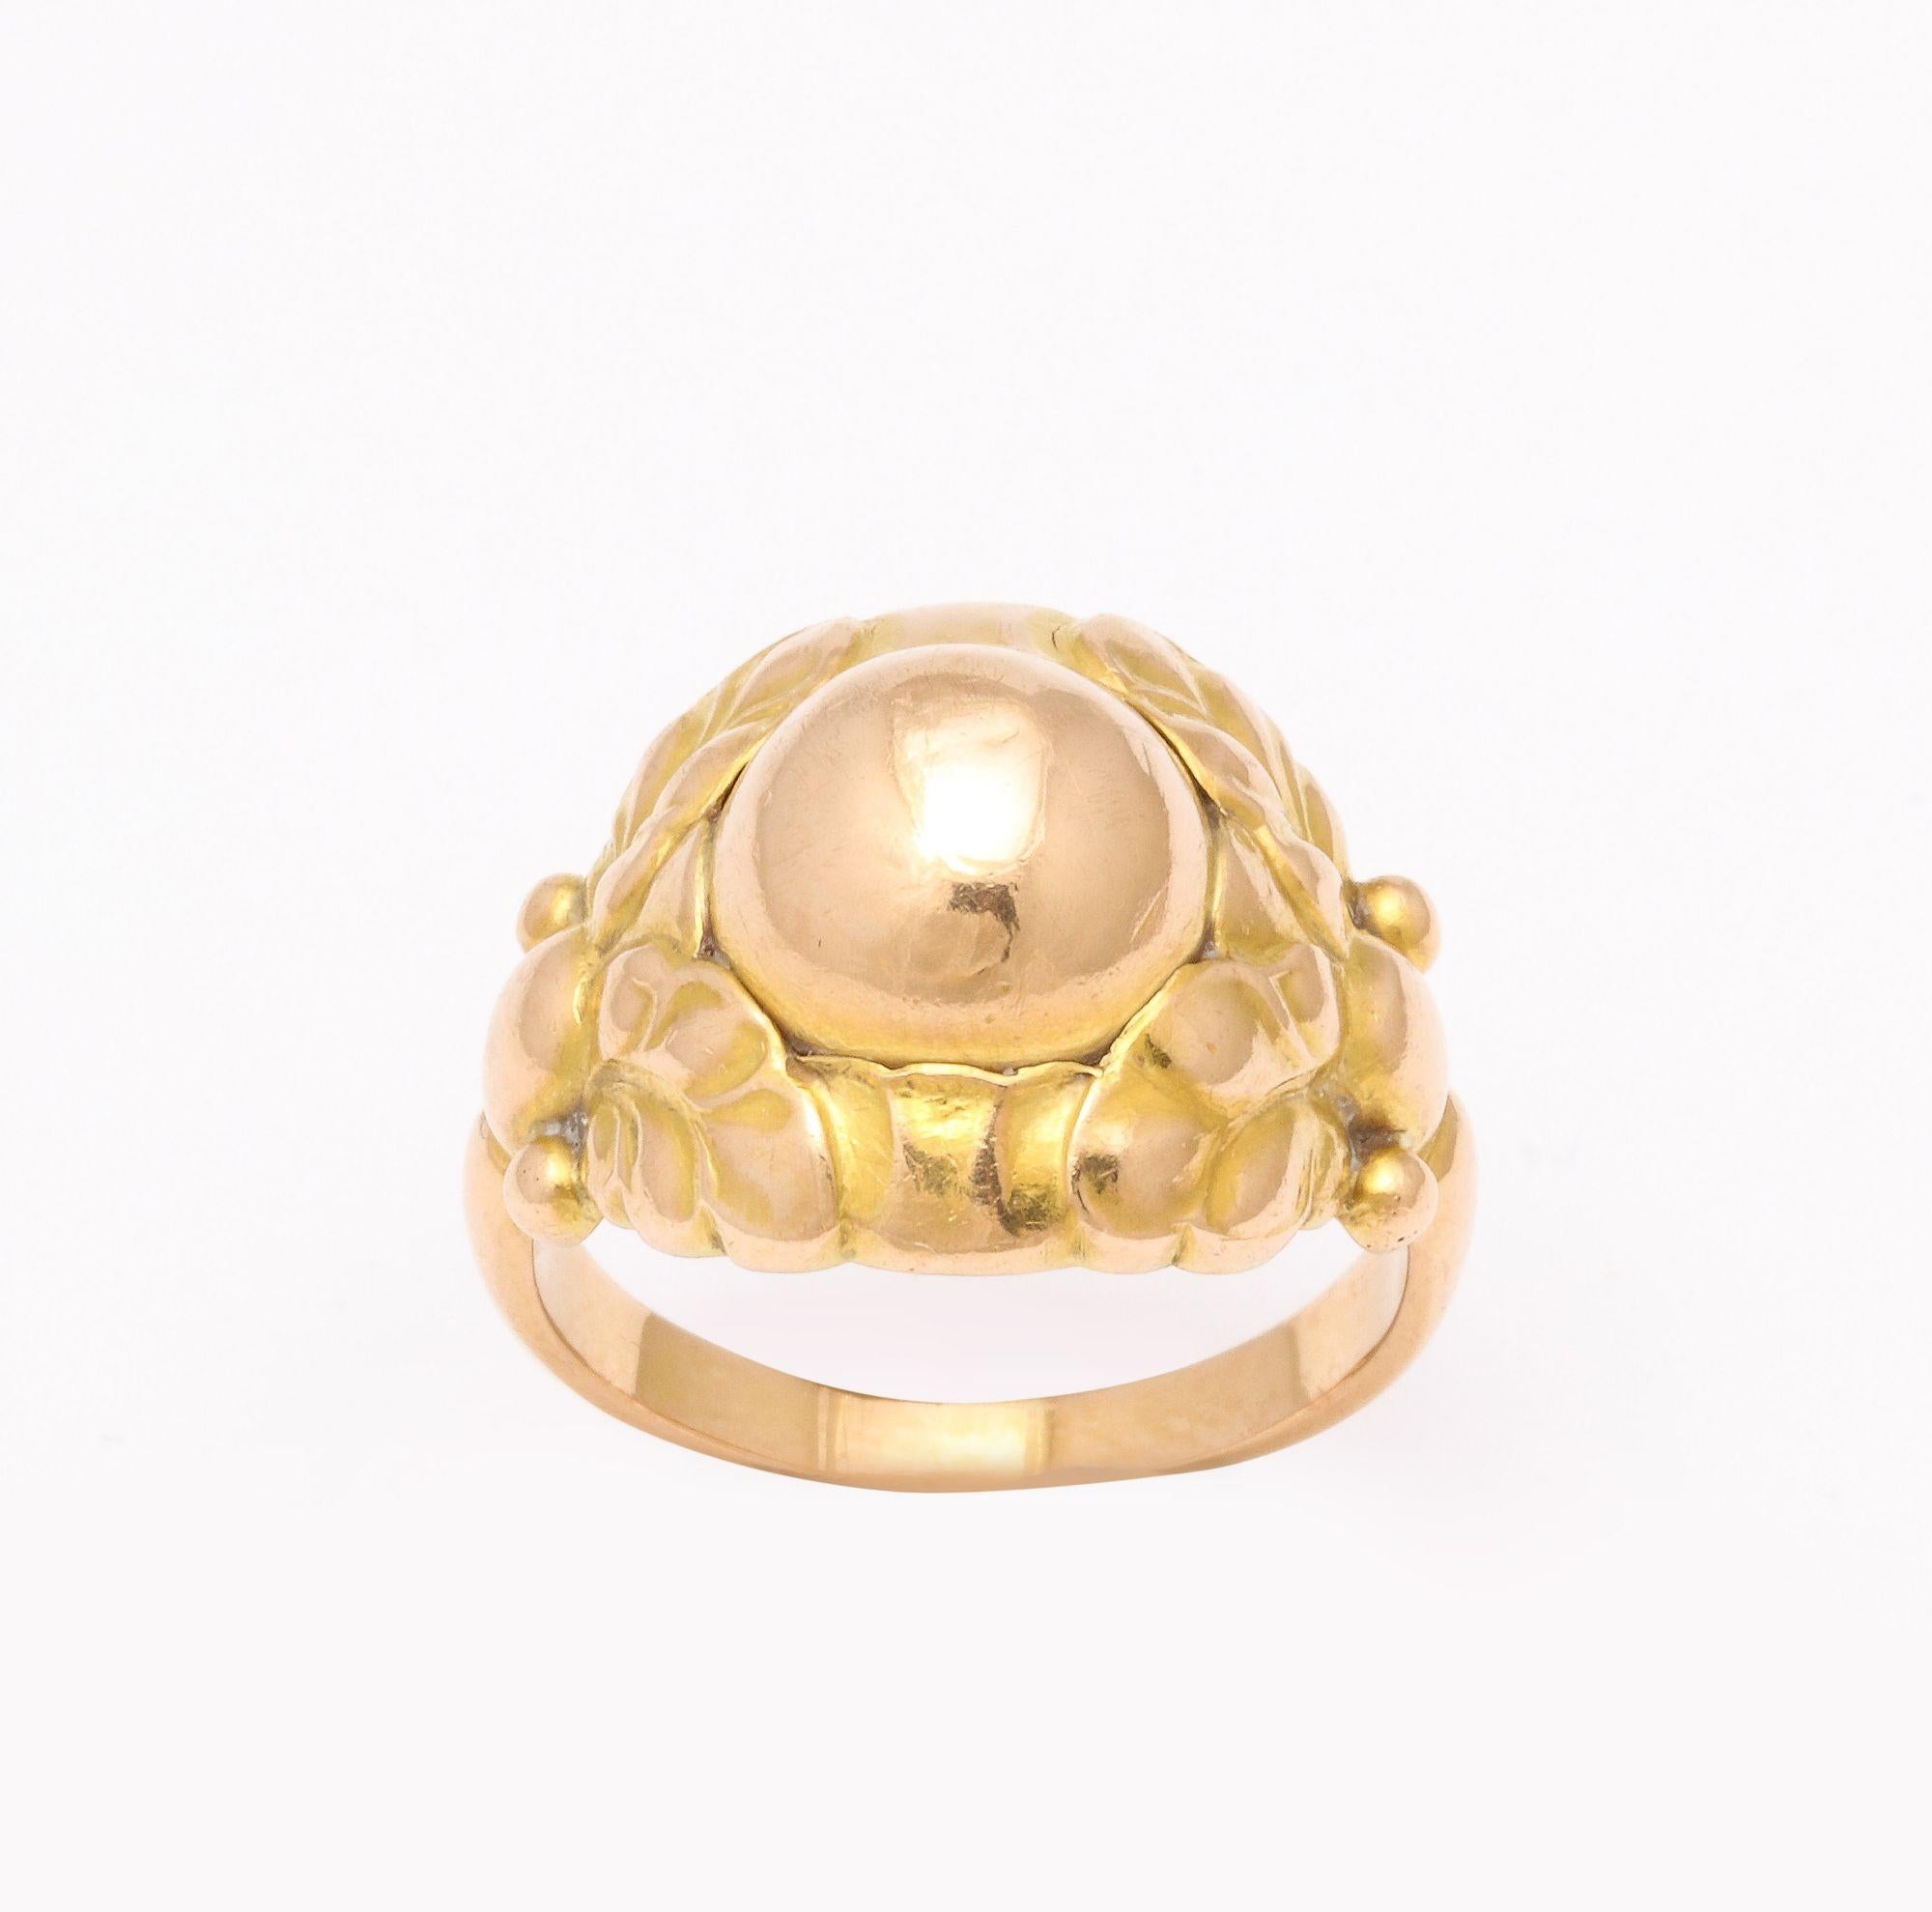 18K Gold GEORG JENSEN #111B Ladies Ring. Modernist Gold Ring with Leaf design. Marked: Georg Jensen in circle. 765; 18K. Size 5.5 Dimensions: Weight: 3.05 DWT
Model no. 111B in 18k gold. With 2 tones of gold - a rose gold band and cabochon and